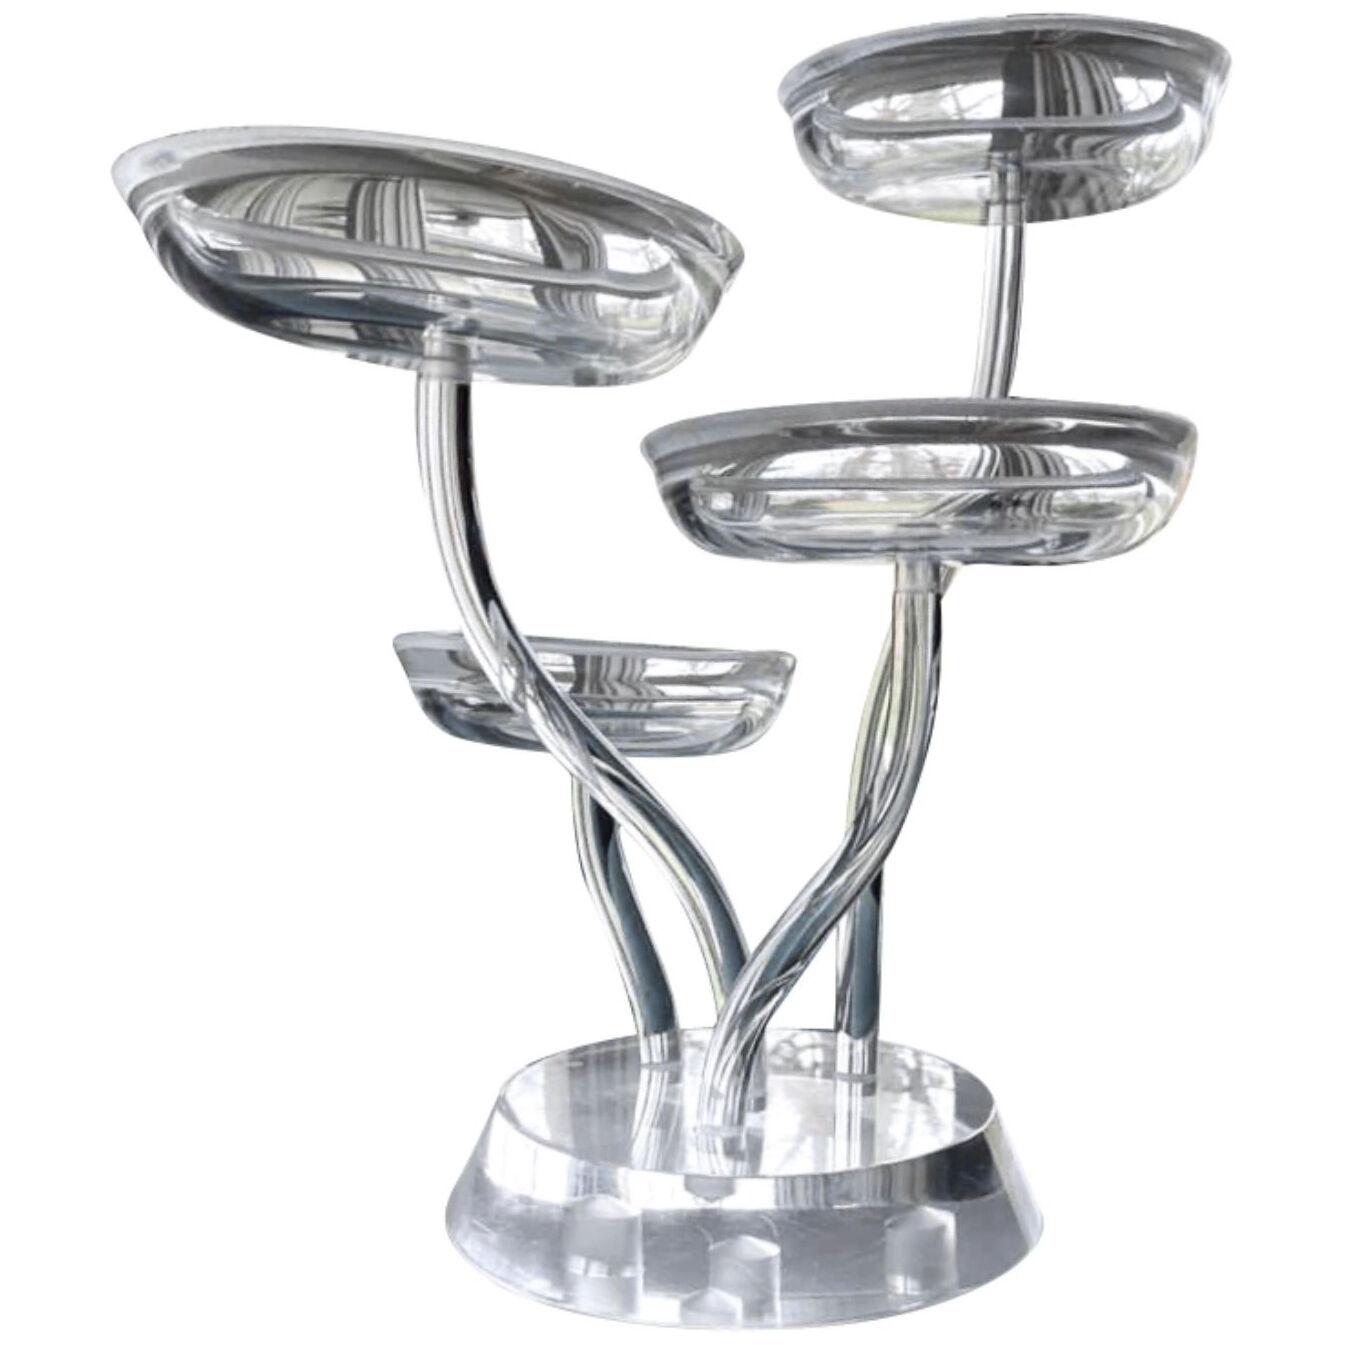 Space Age Mod Astrolite Lucite Epergne Sculpture Ritts Co, Modular Centerpiece